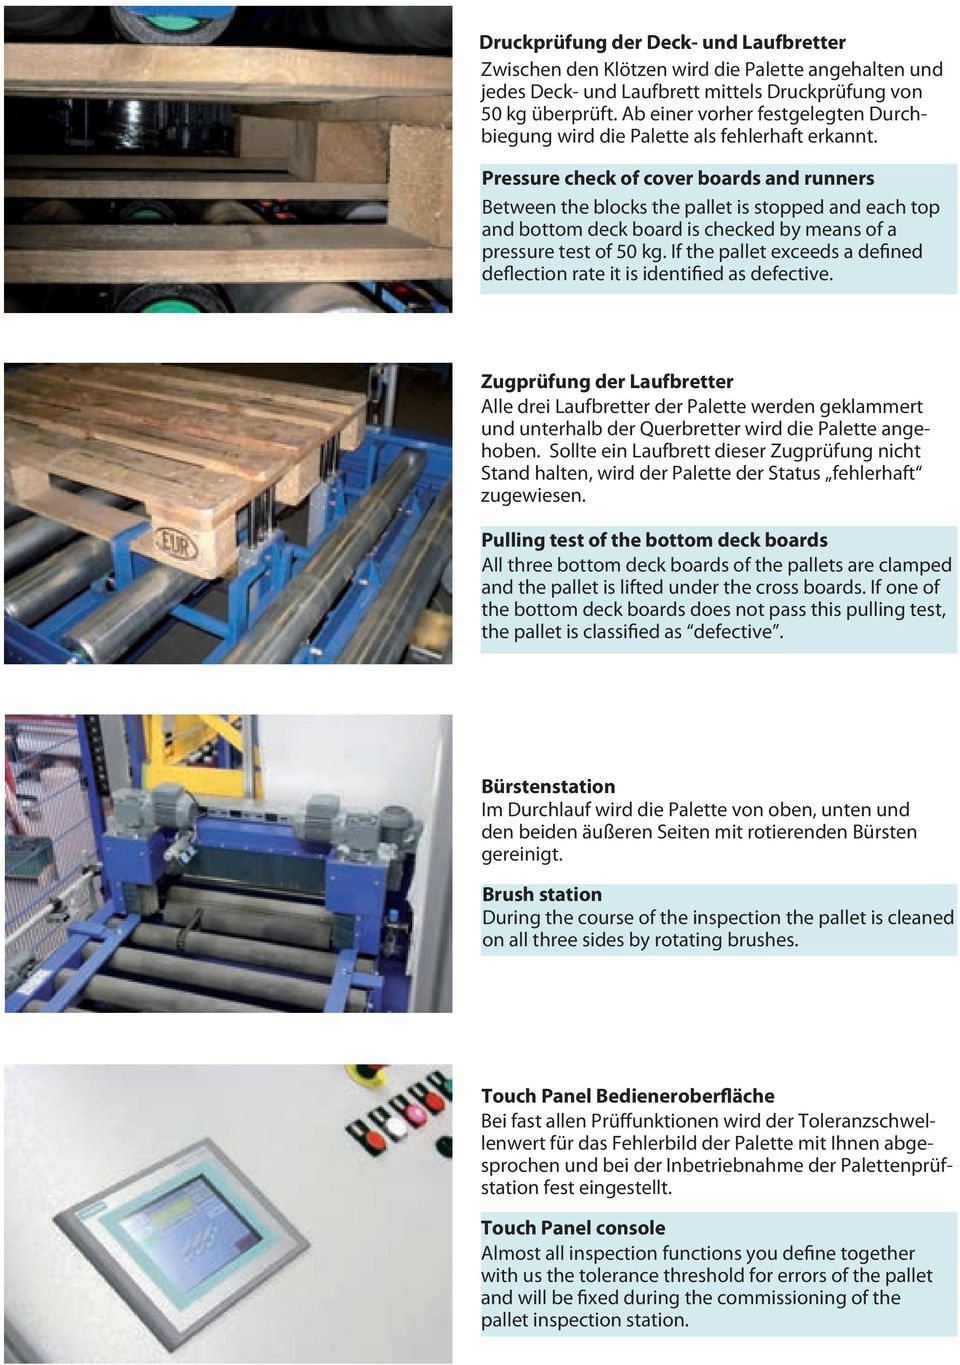 Pressure check of cover boards and runners Between the blocks the pallet is stopped and each top and bottom deck board is checked by means of a pressure test of 50 kg.